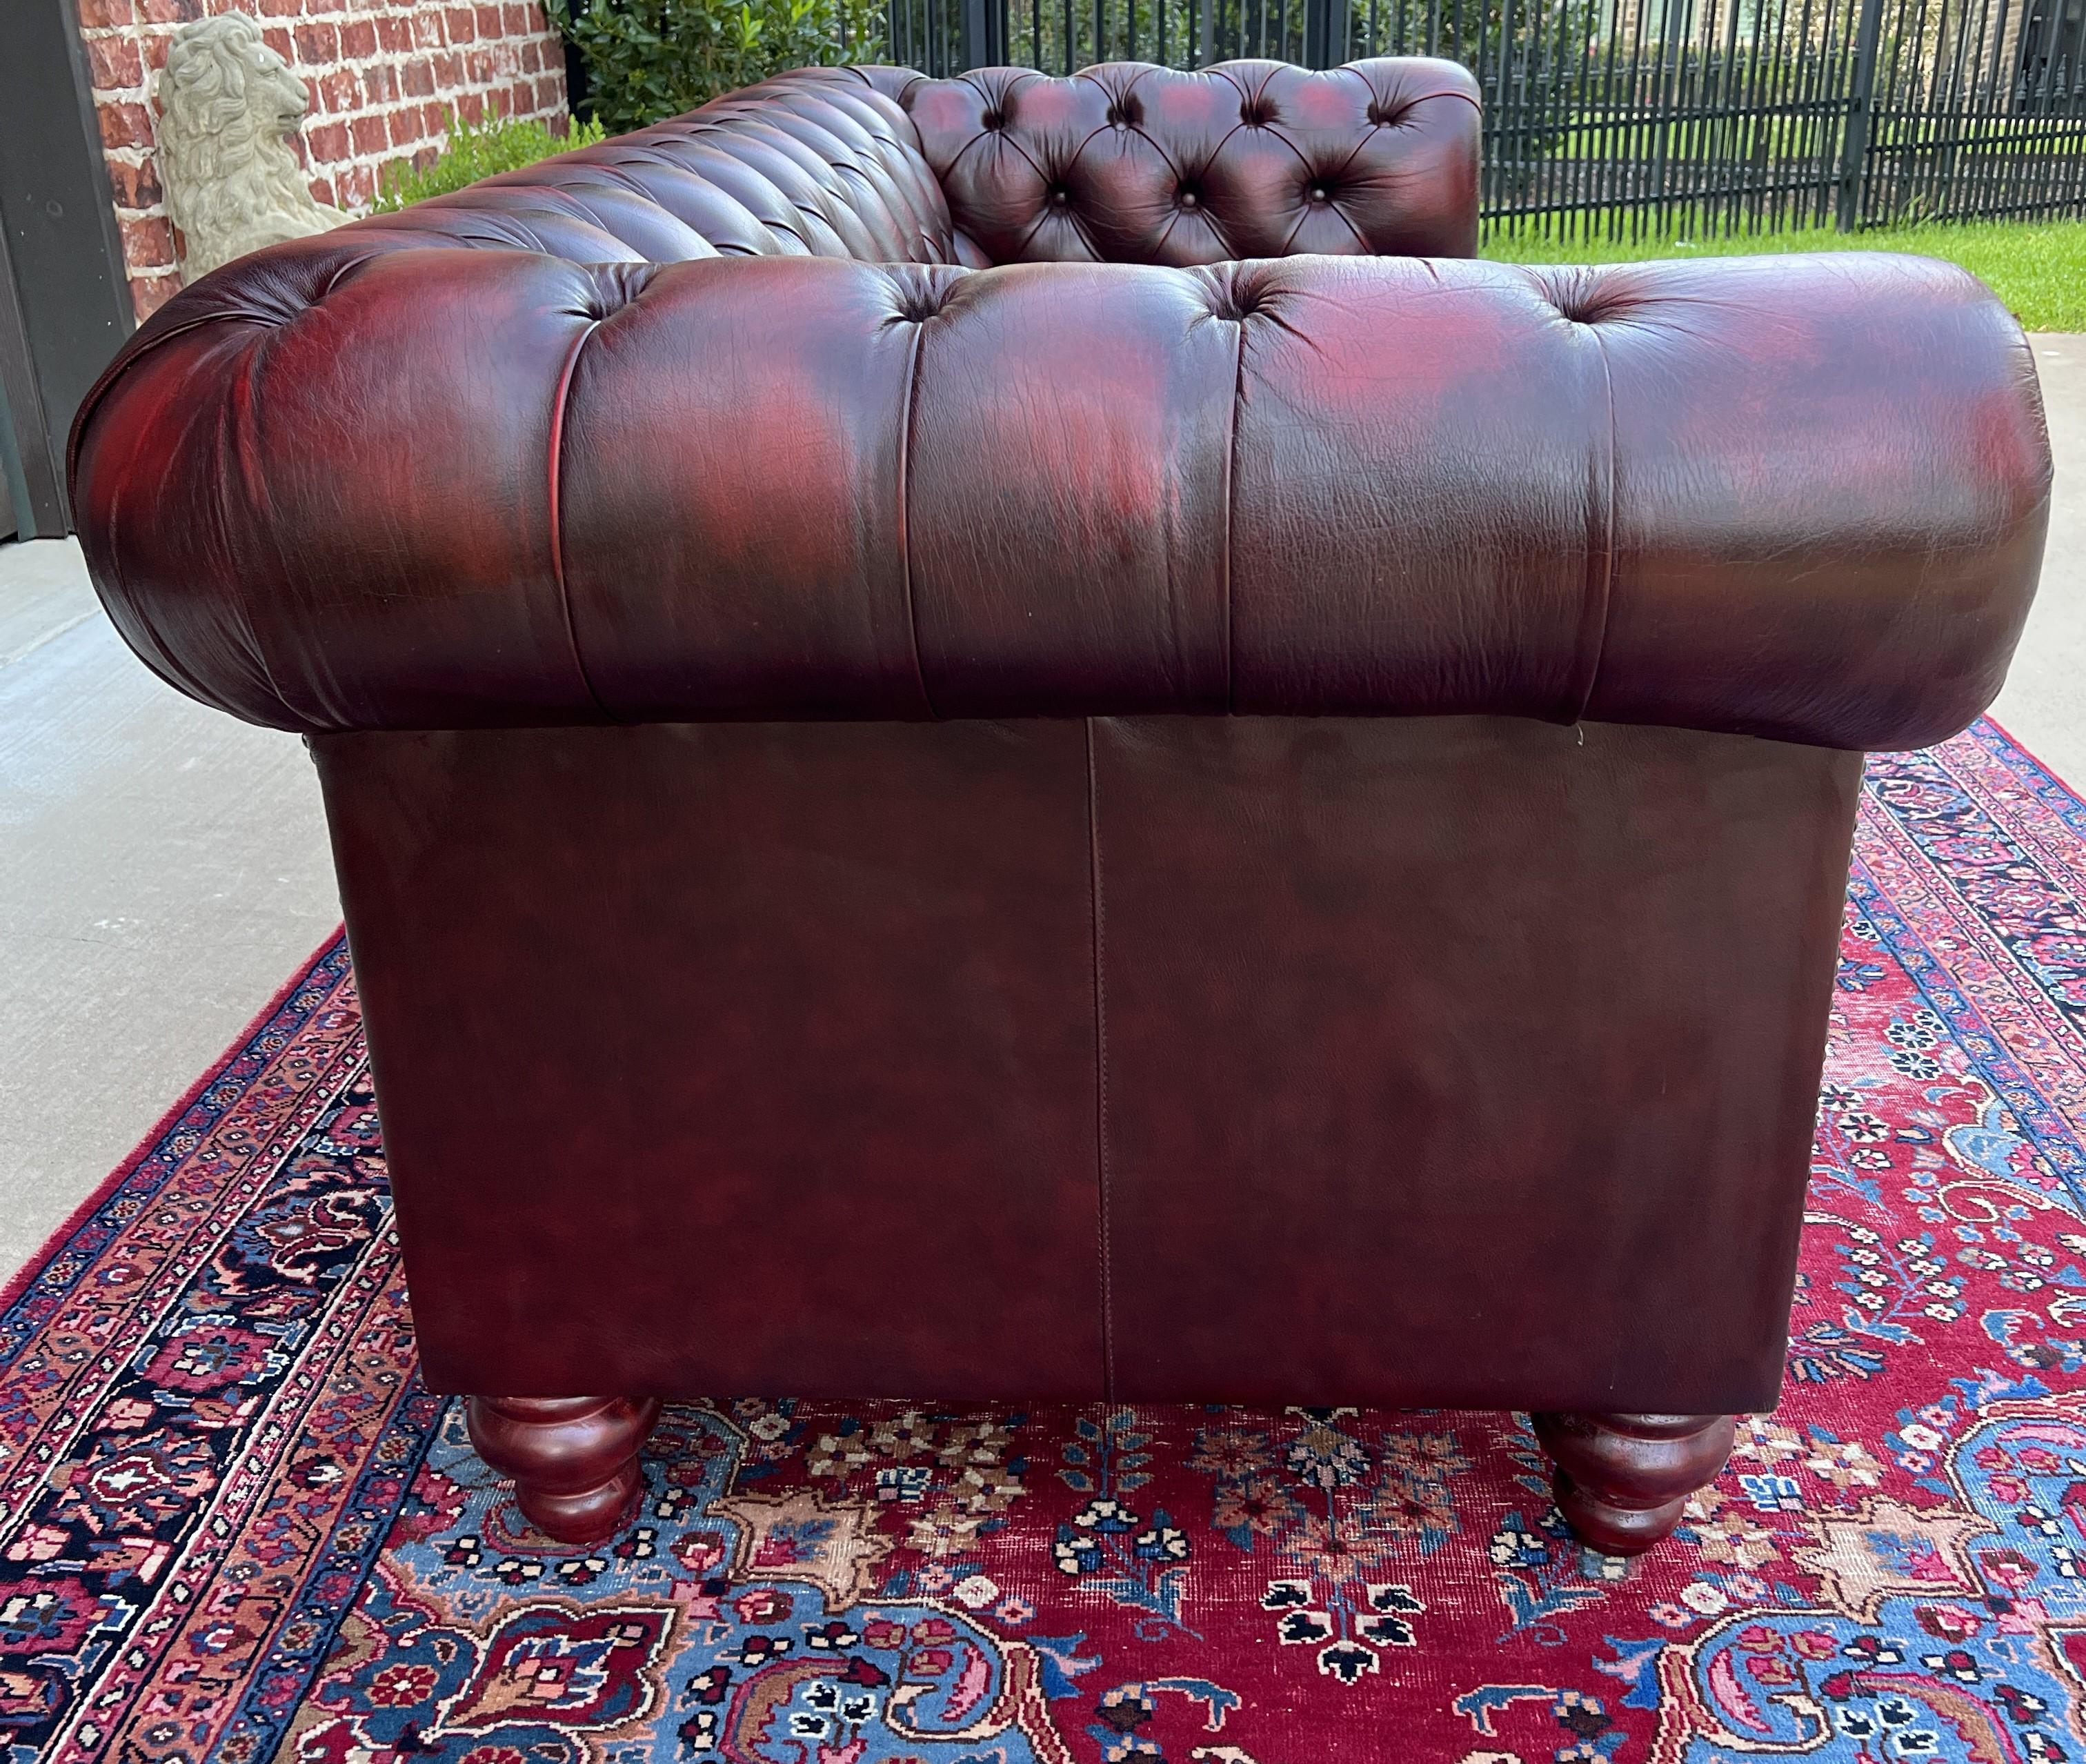 Vintage English Chesterfield Sofa Leather Tufted Seat Oxblood Red Mid-Century #1 5